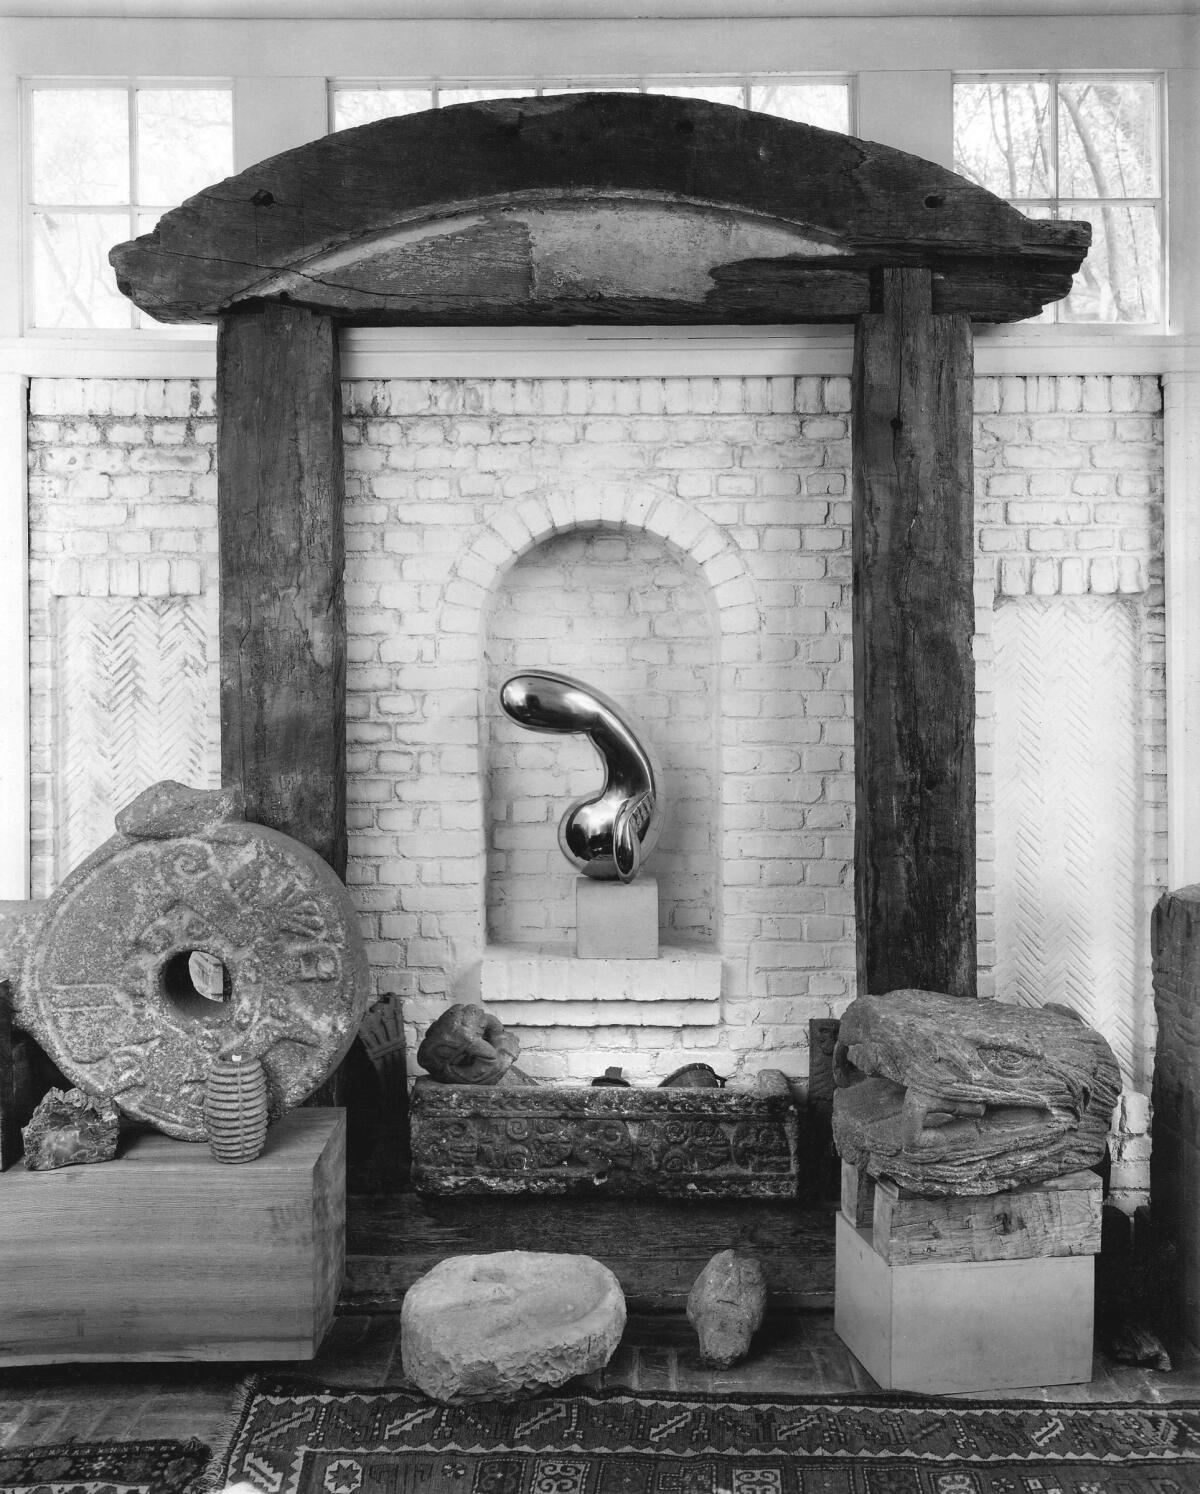 Constantin Brancusi's sculpture "Princess X" is surrounded by Aztec stone sculptures in the Arensbergs' foyer.